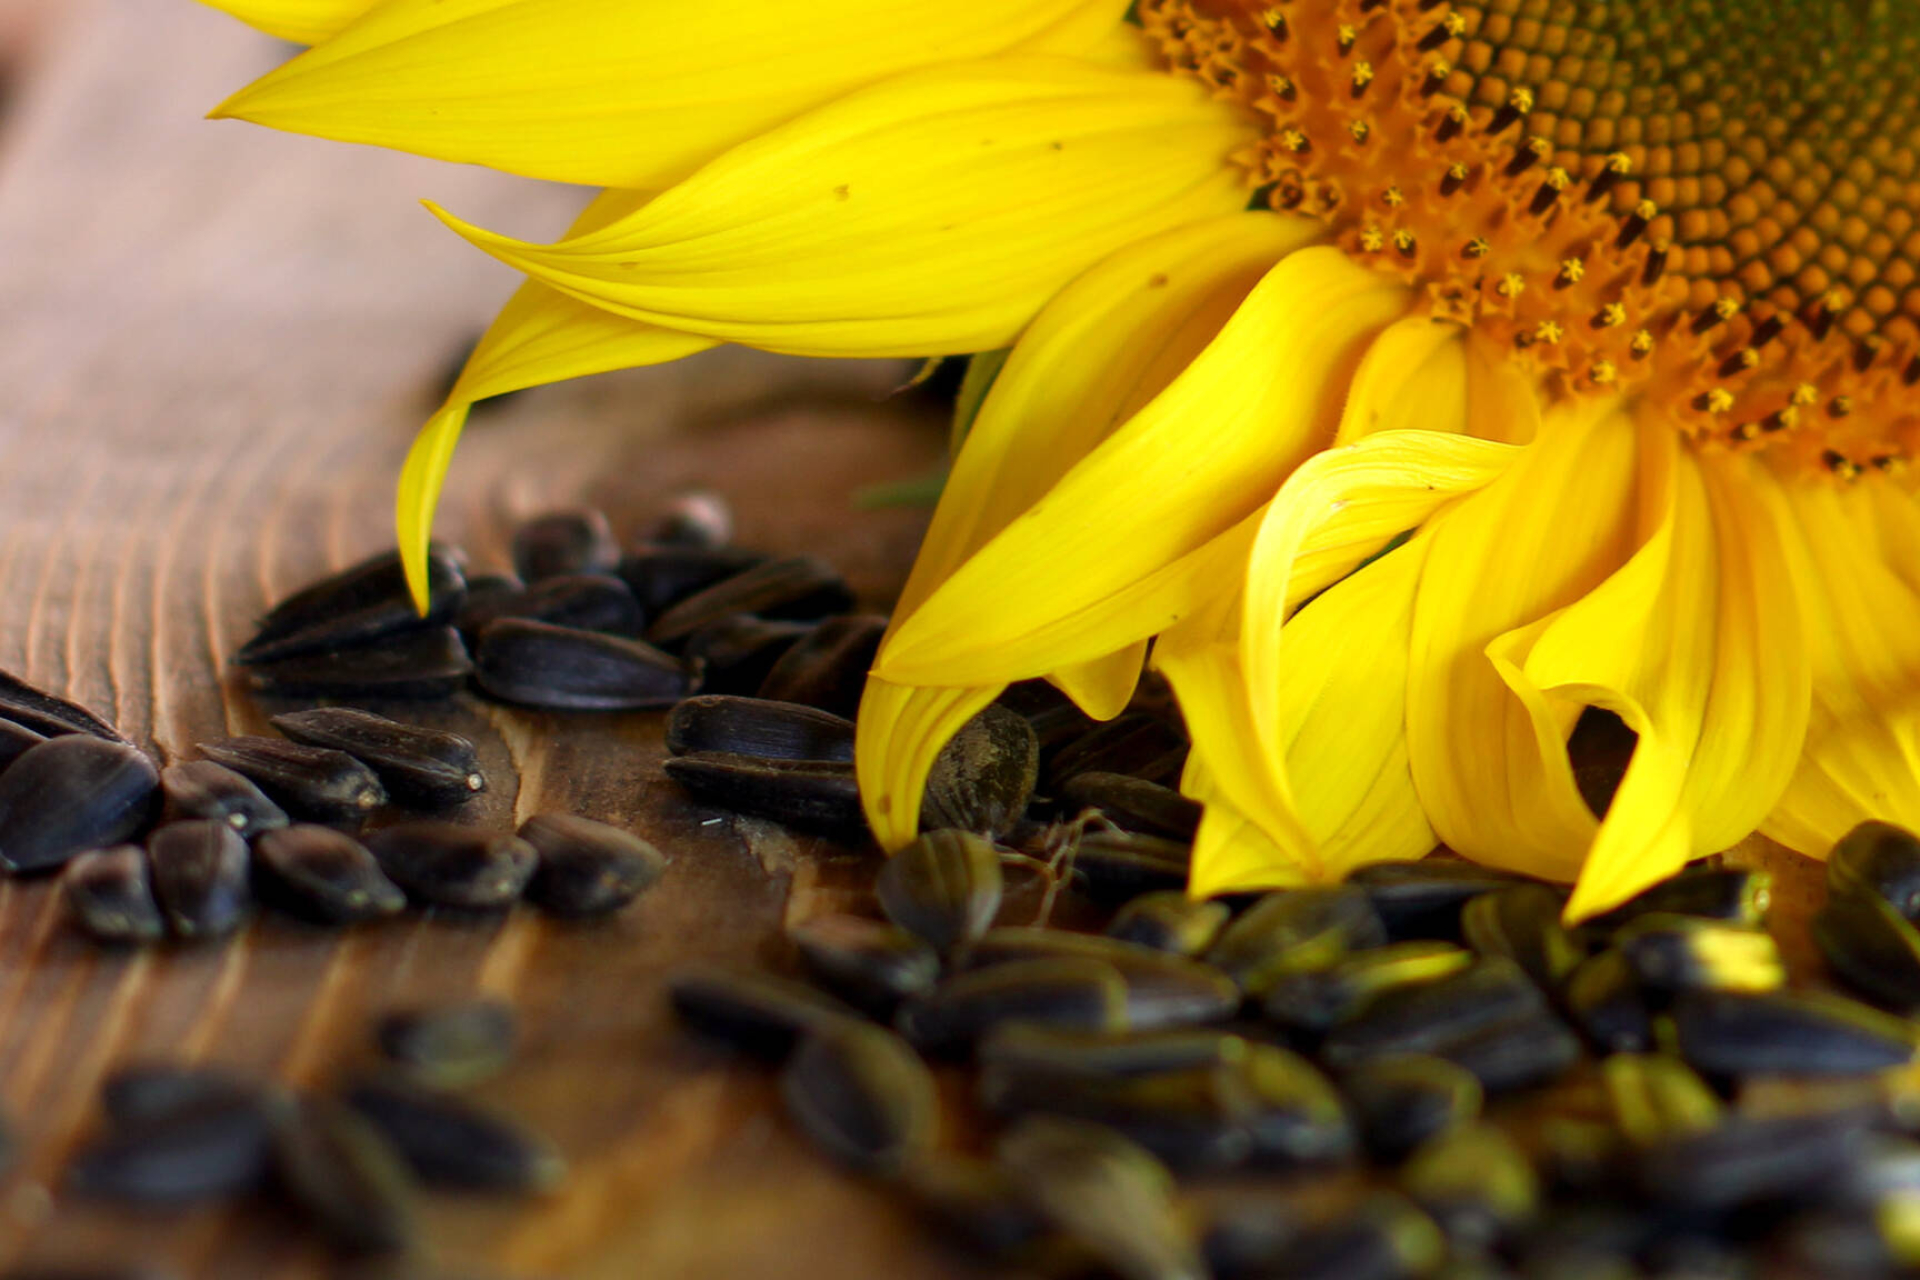 Sunflower Seeds, Versatile cooking oil, Natural skincare ingredient, Creative commons images, 1920x1280 HD Desktop